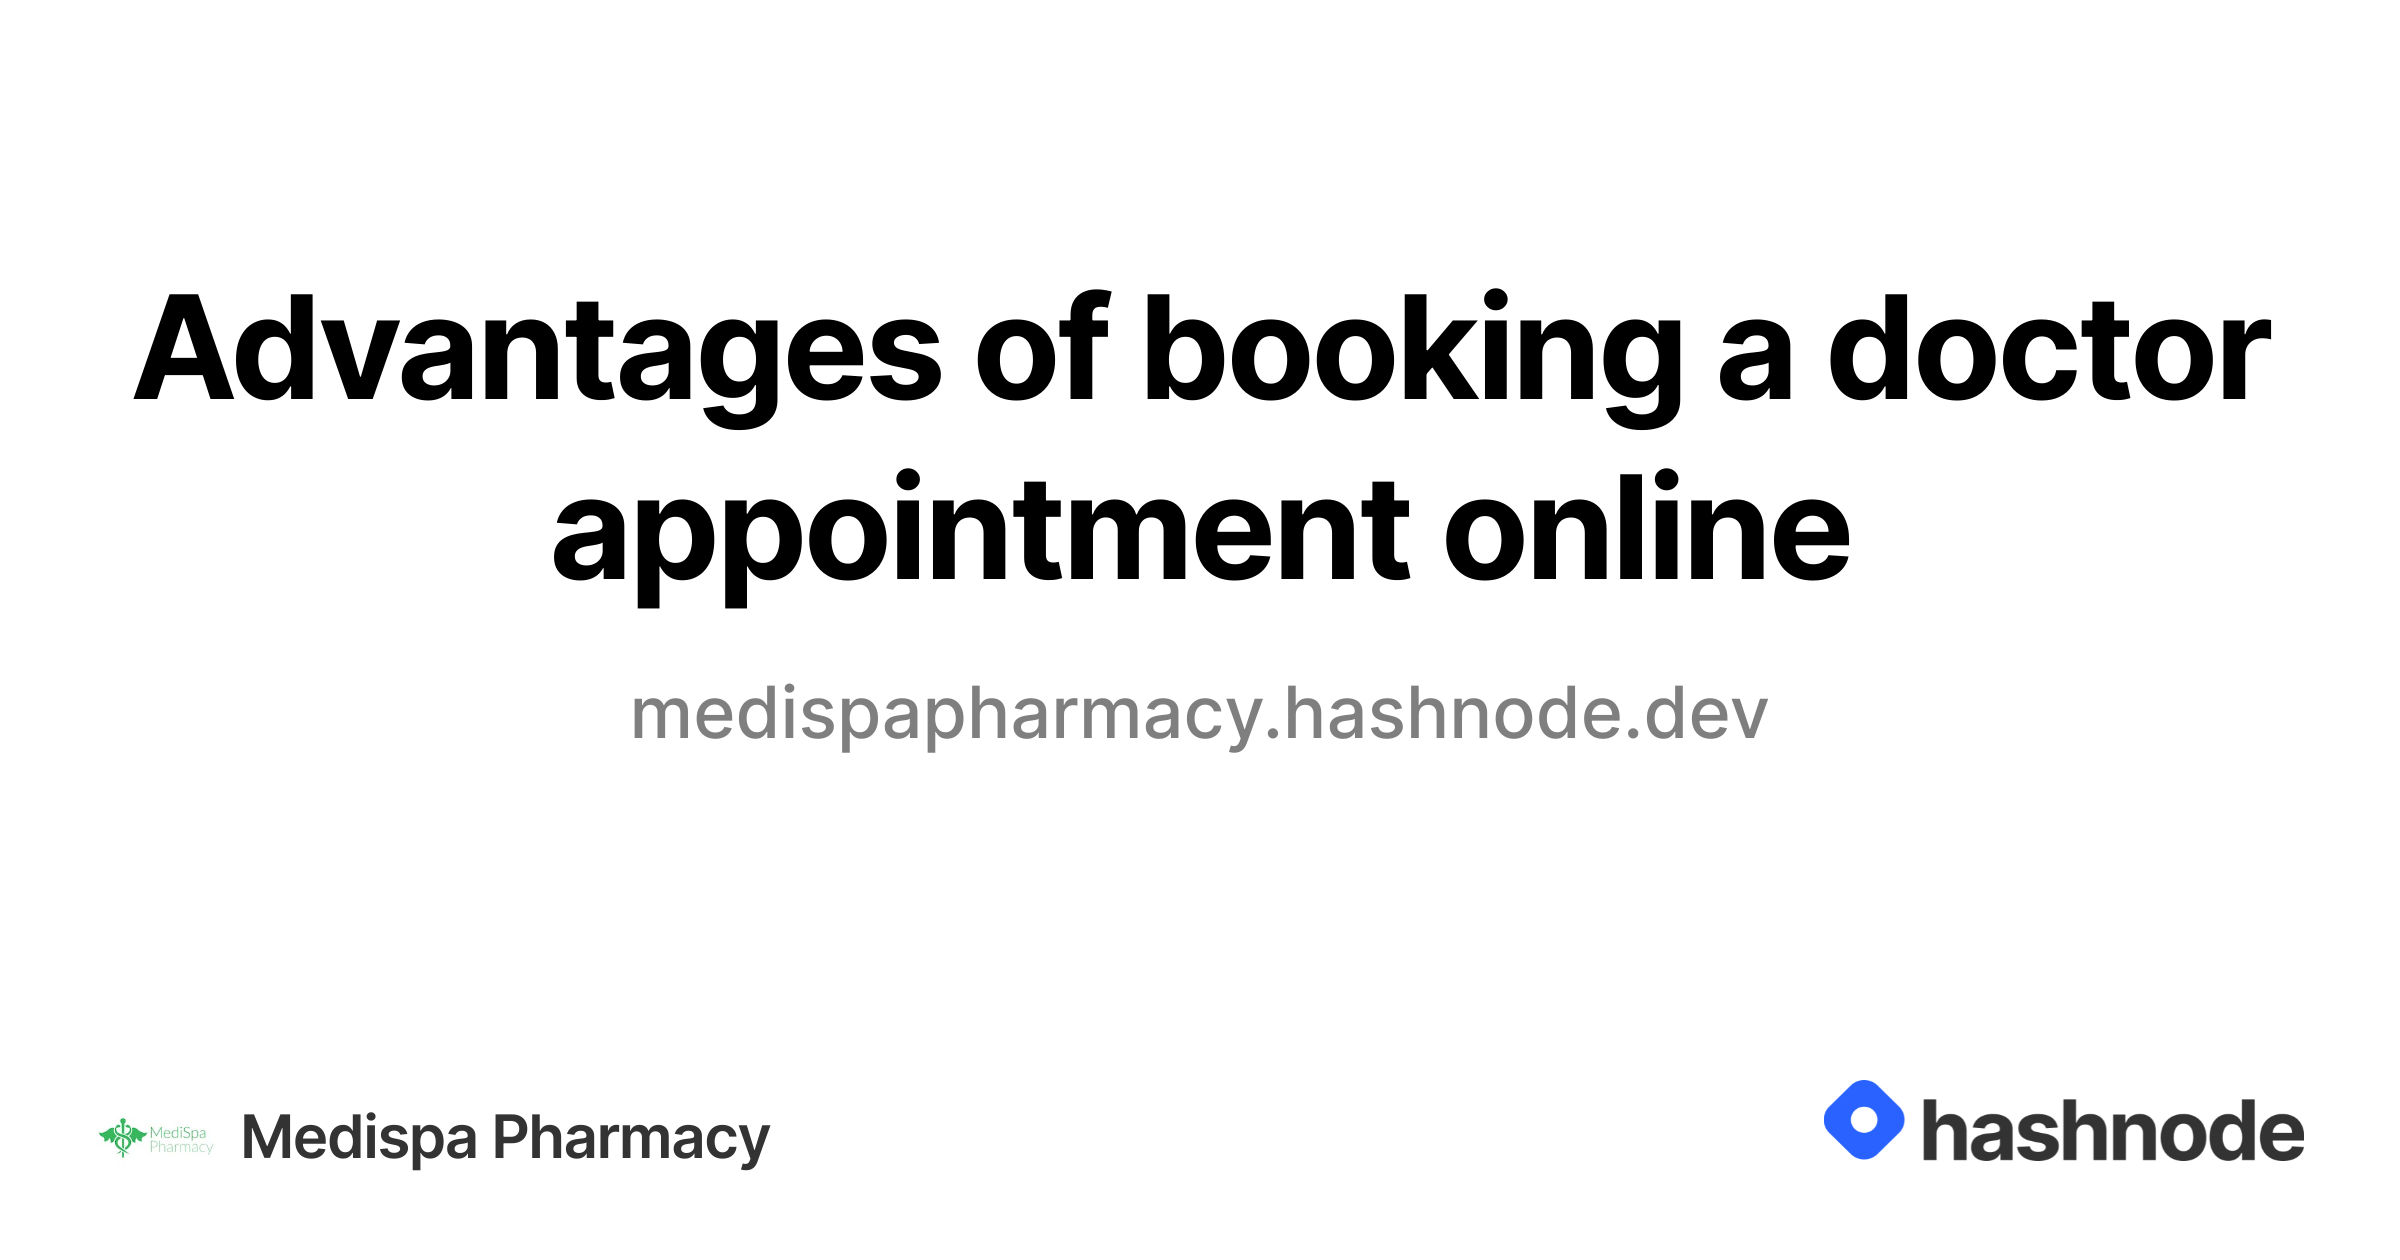 Advantages of booking a doctor appointment online